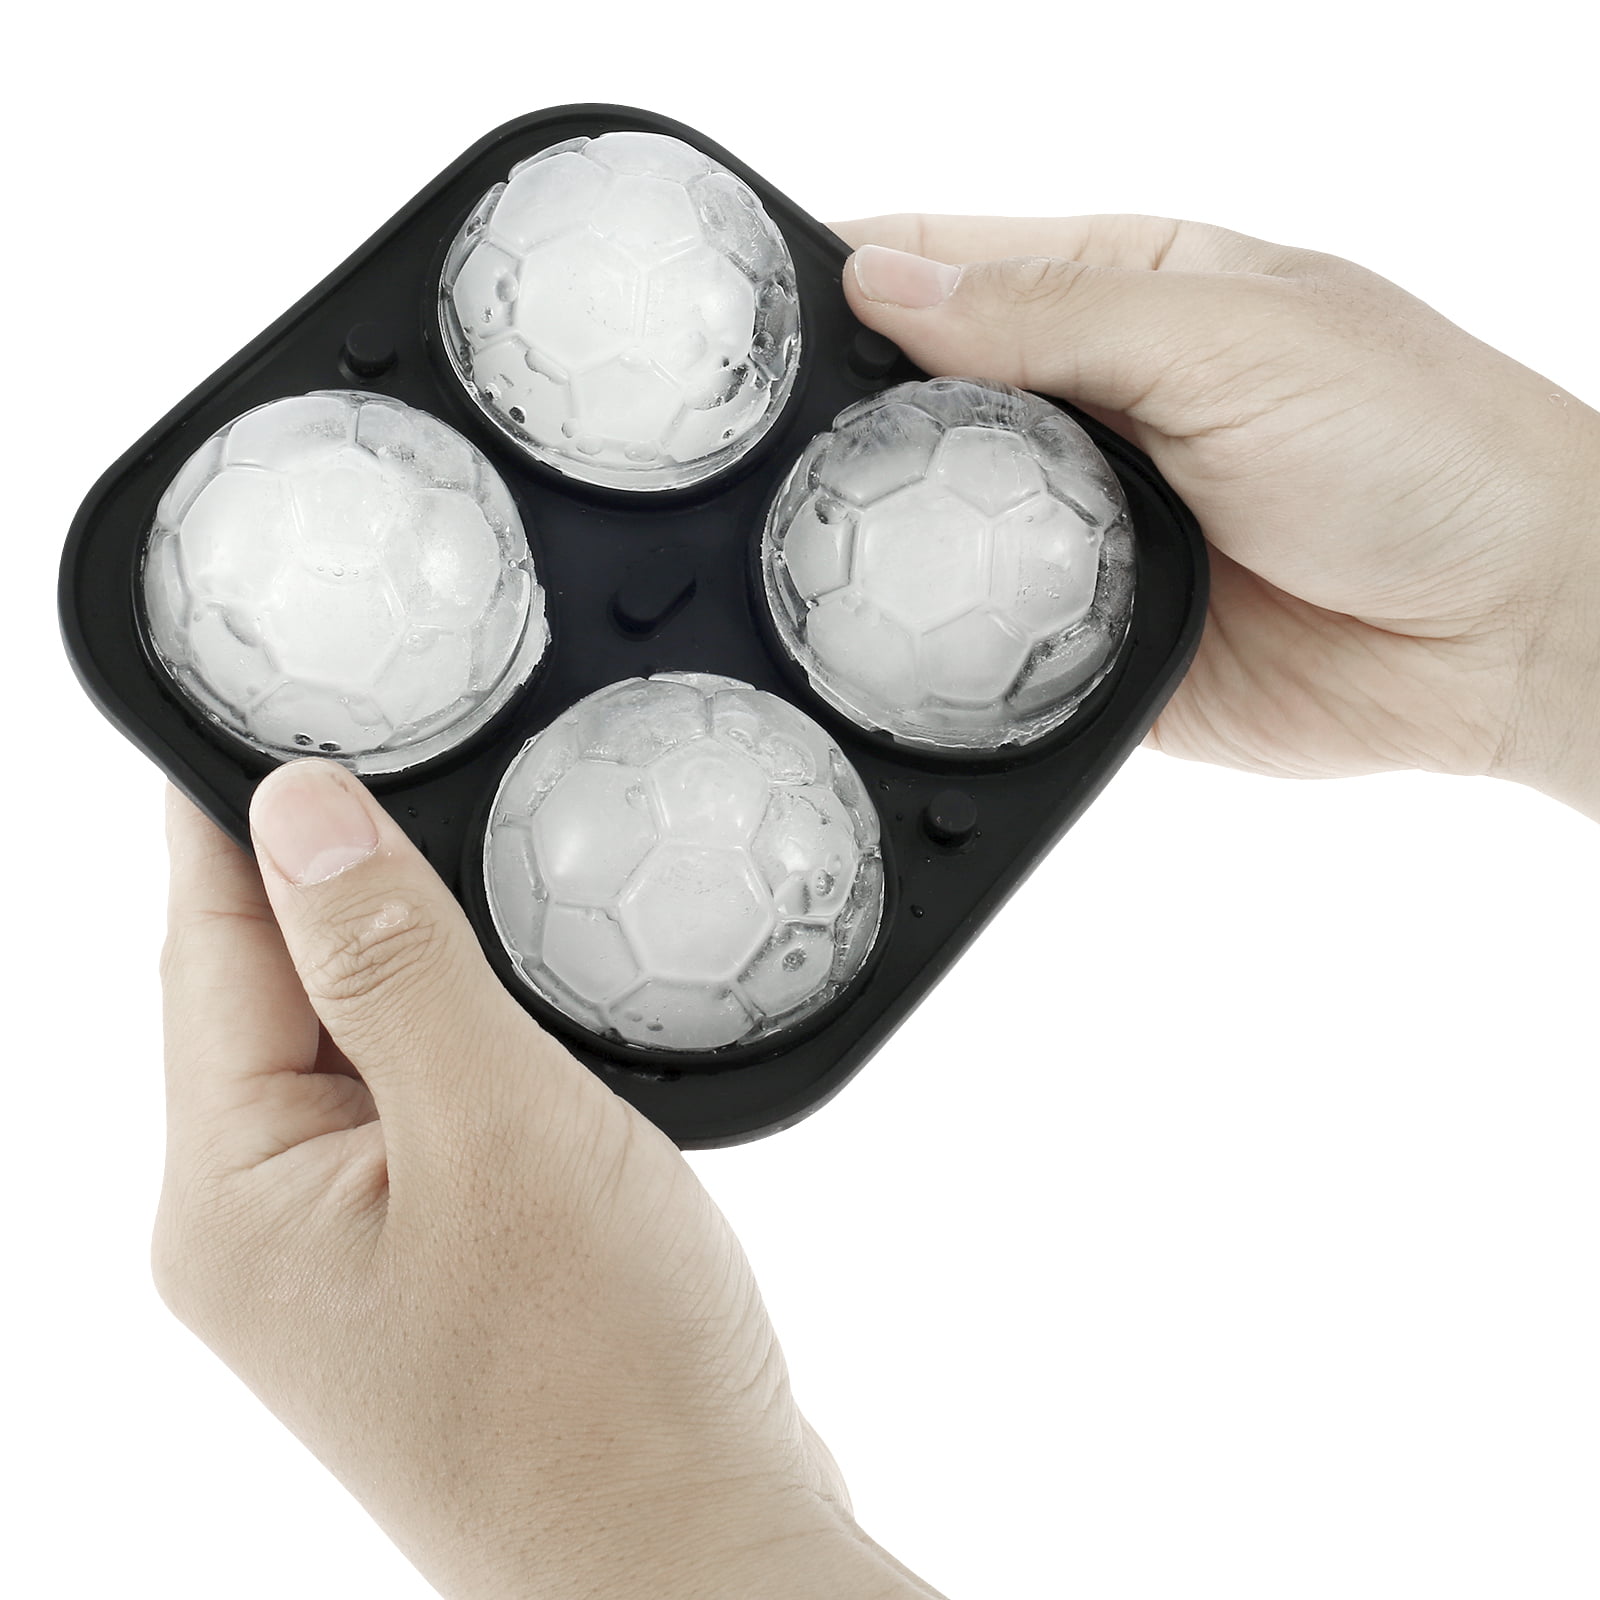 Silicone Alley, Silicone Ice Ball Mold Tray Maker of 4 Ice Balls, Set of 2,  Black - Silicone Alley